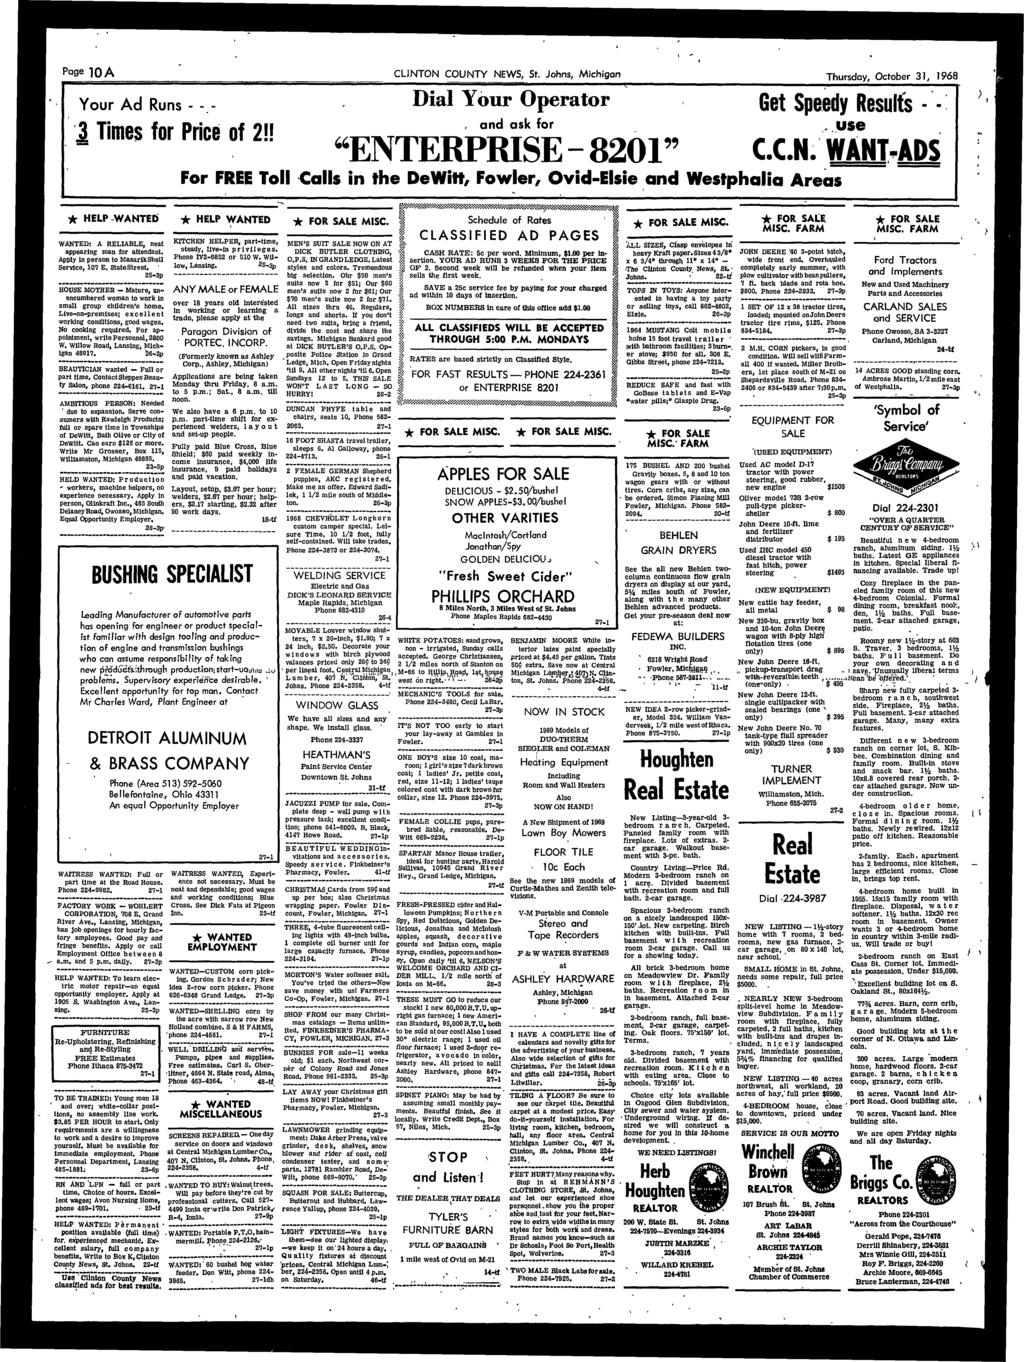 Page 10 A CLINTON COUNTY NEWS, St. Johns, Mchgan Thursday, October 31, 1968 Your Ad Runs - - - 3 Tmes for Prce of 2!